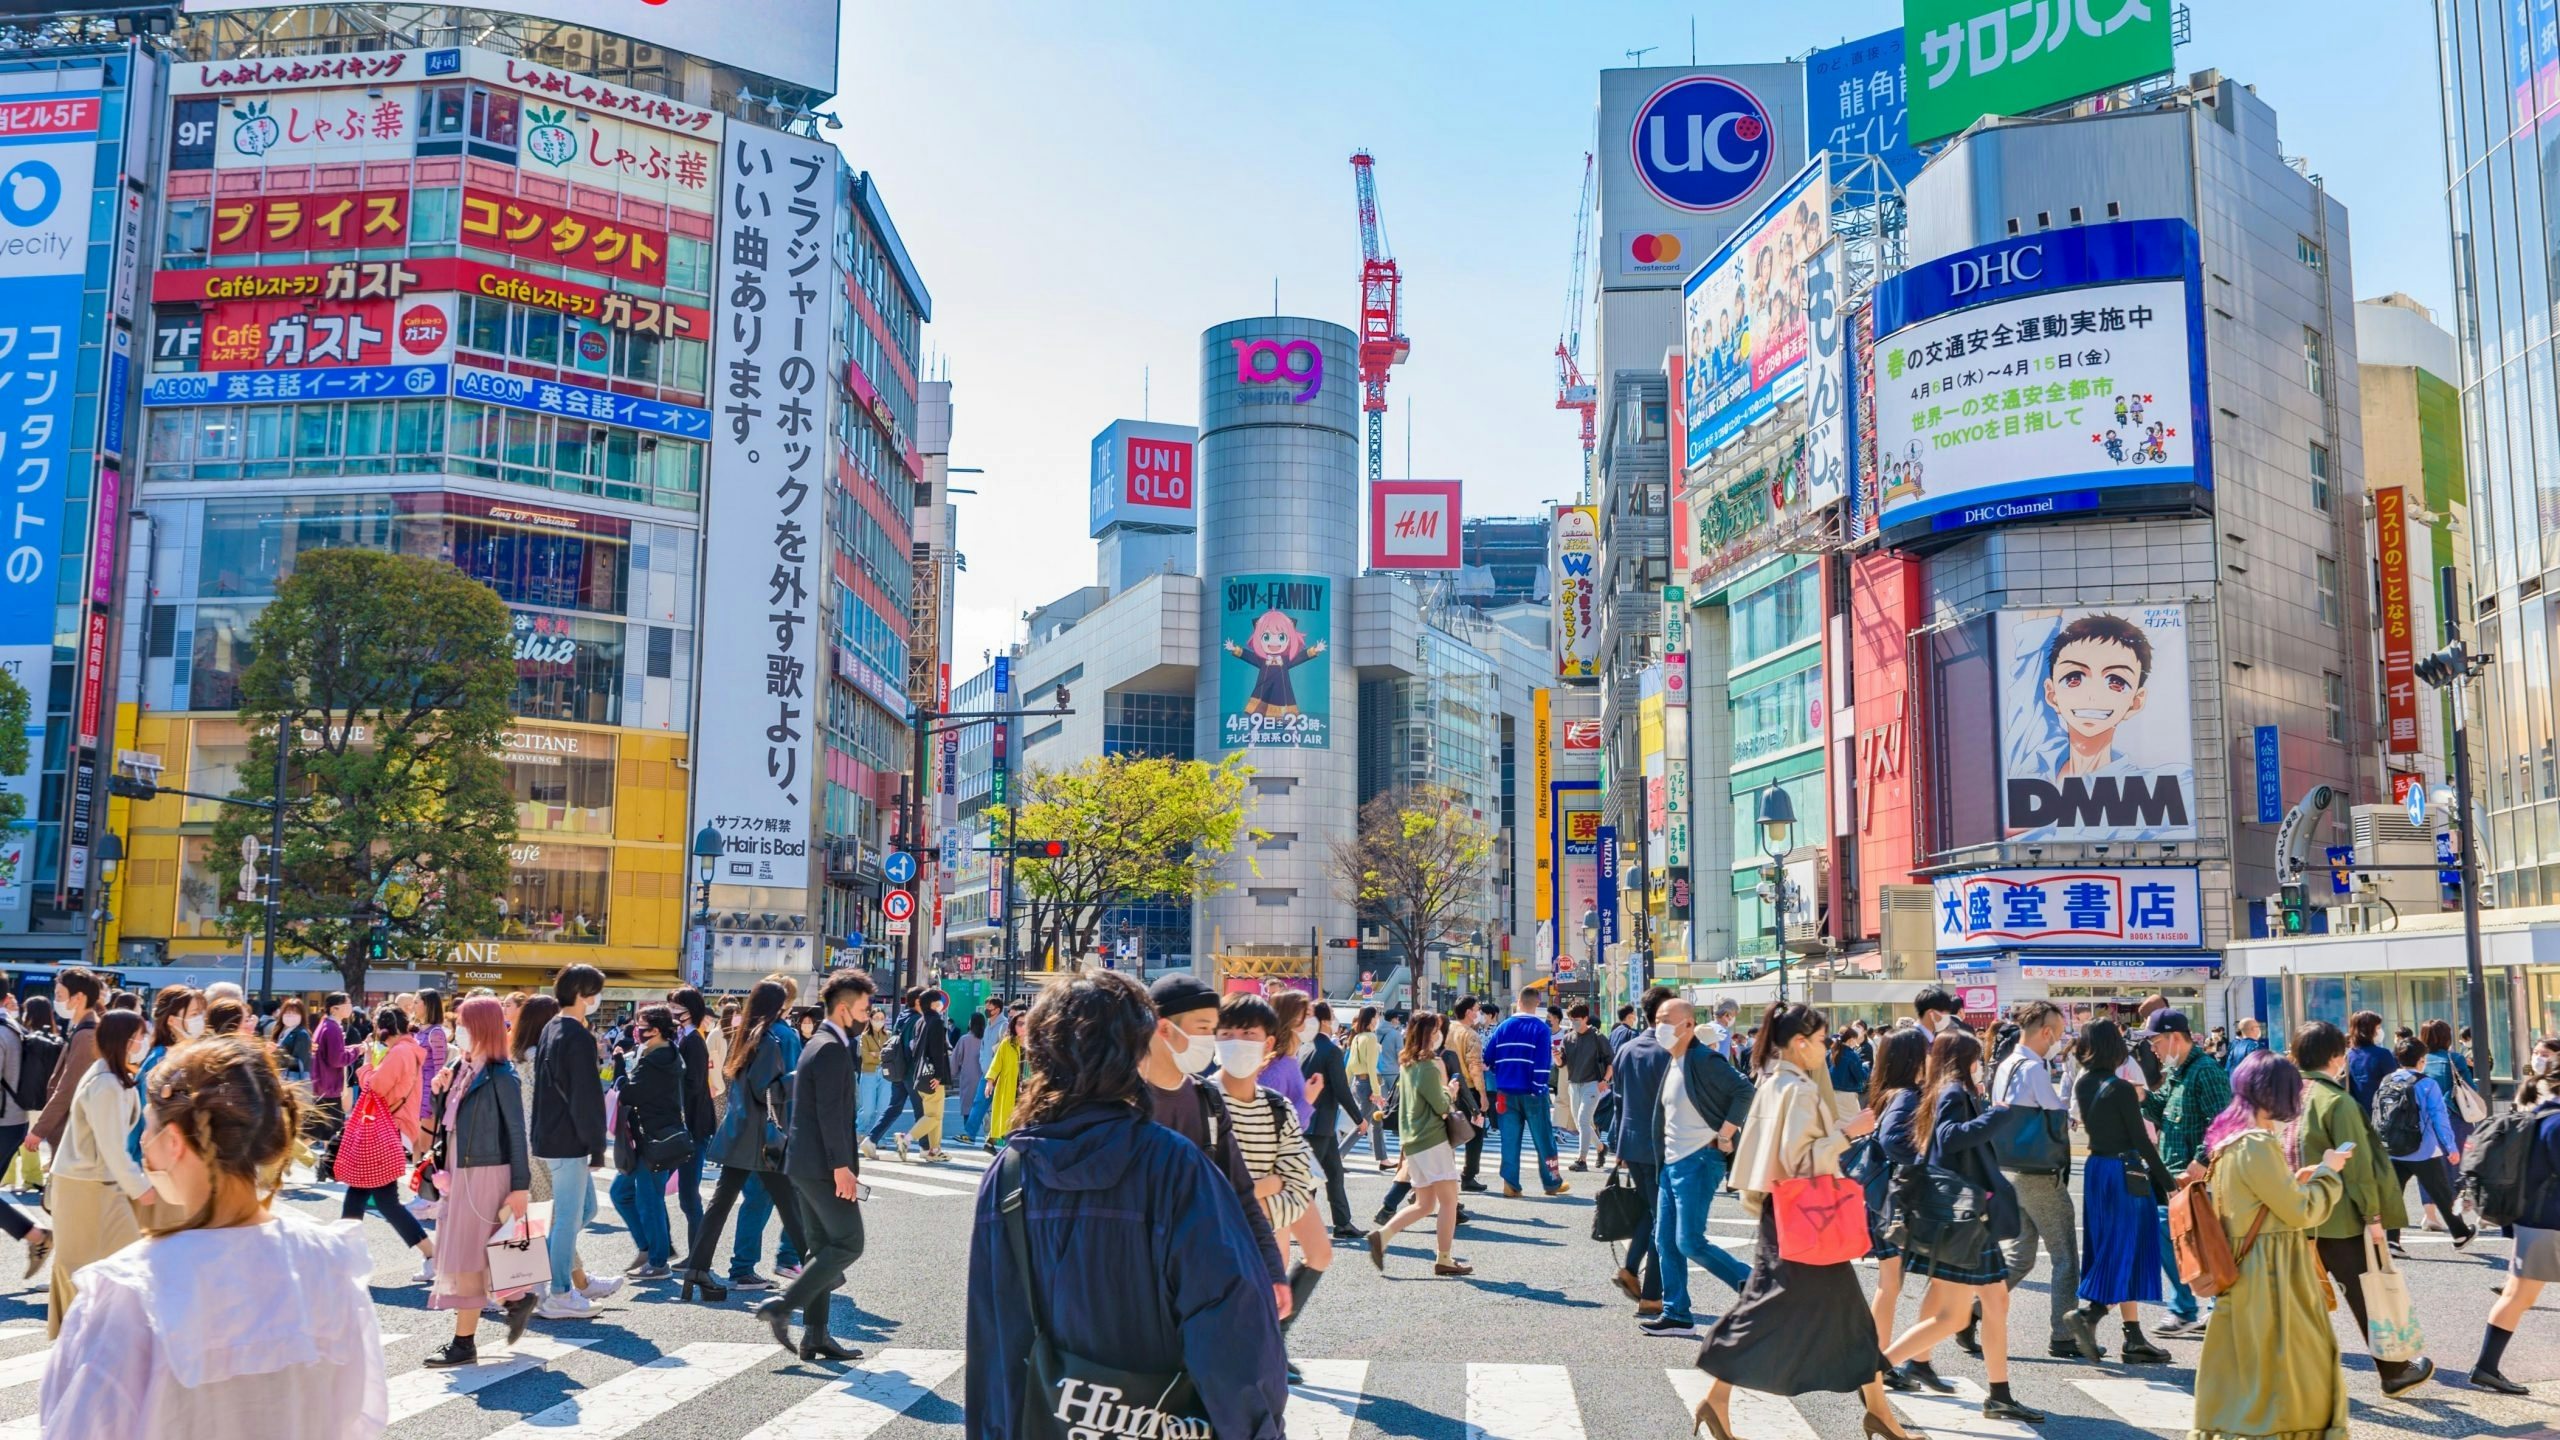 The international tourism industry should prepare for the imminent return of Chinese international tourism, according to McKinsey’s latest report. Photo: Shutterstock